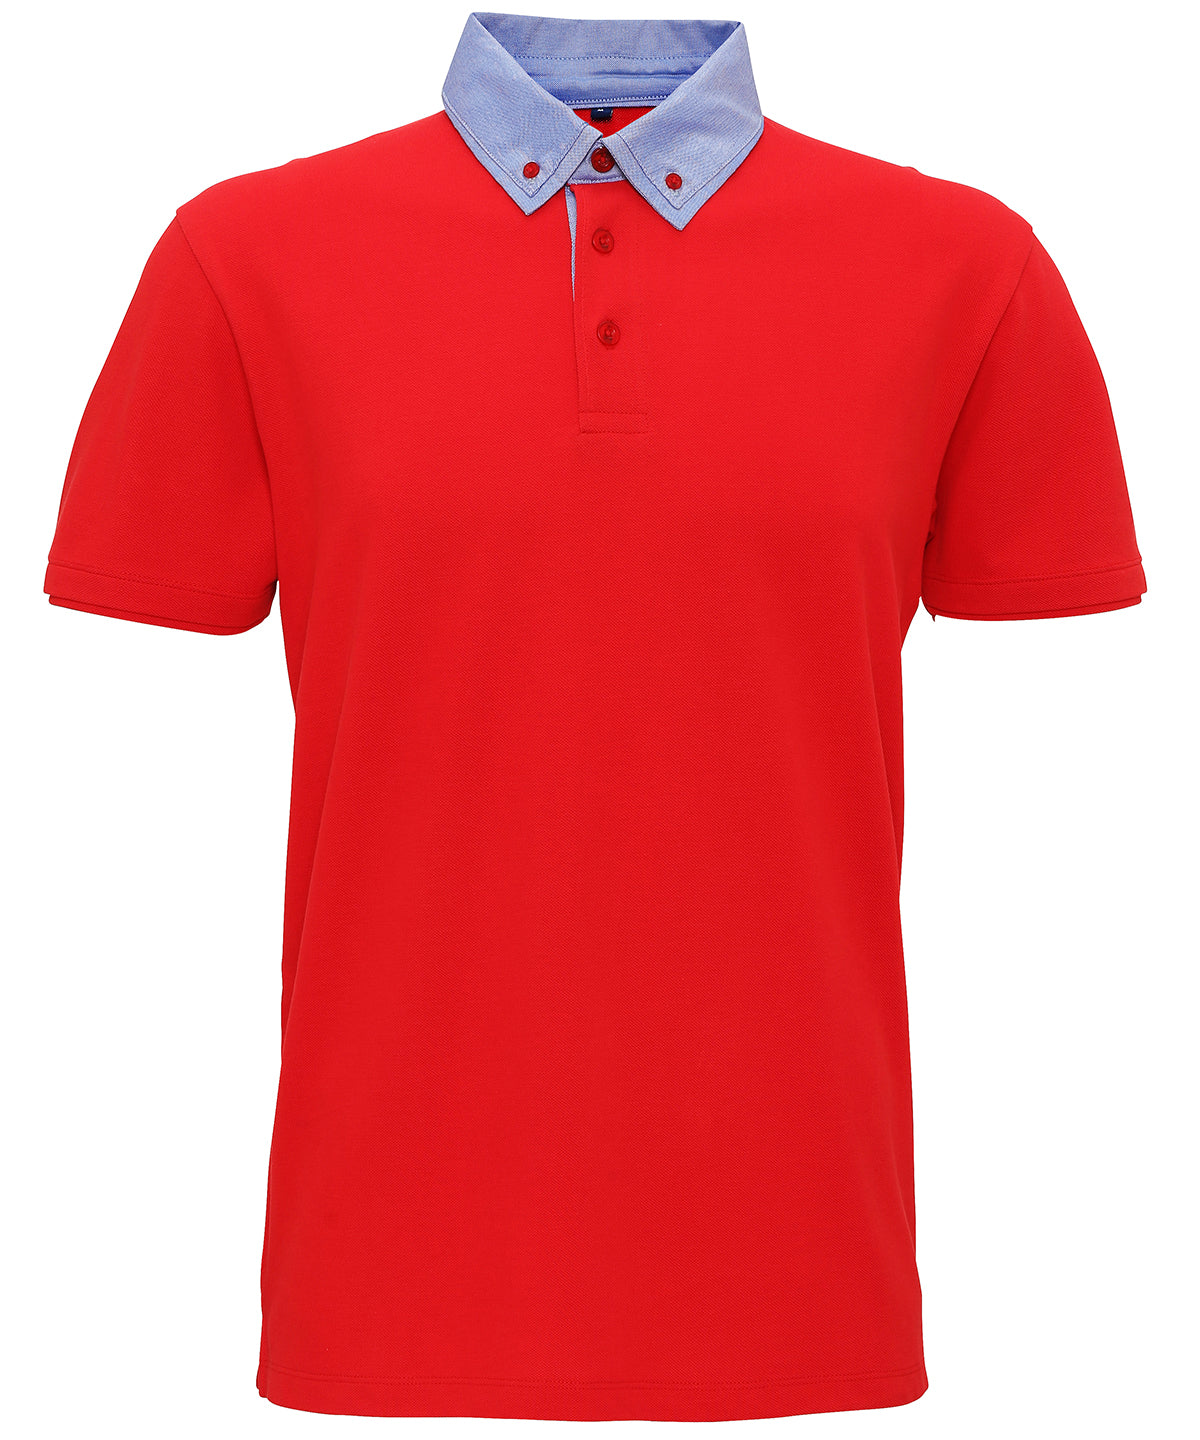 Personalised Polo Shirts - Mid Red Asquith & Fox Men's chambray button-down collar polo